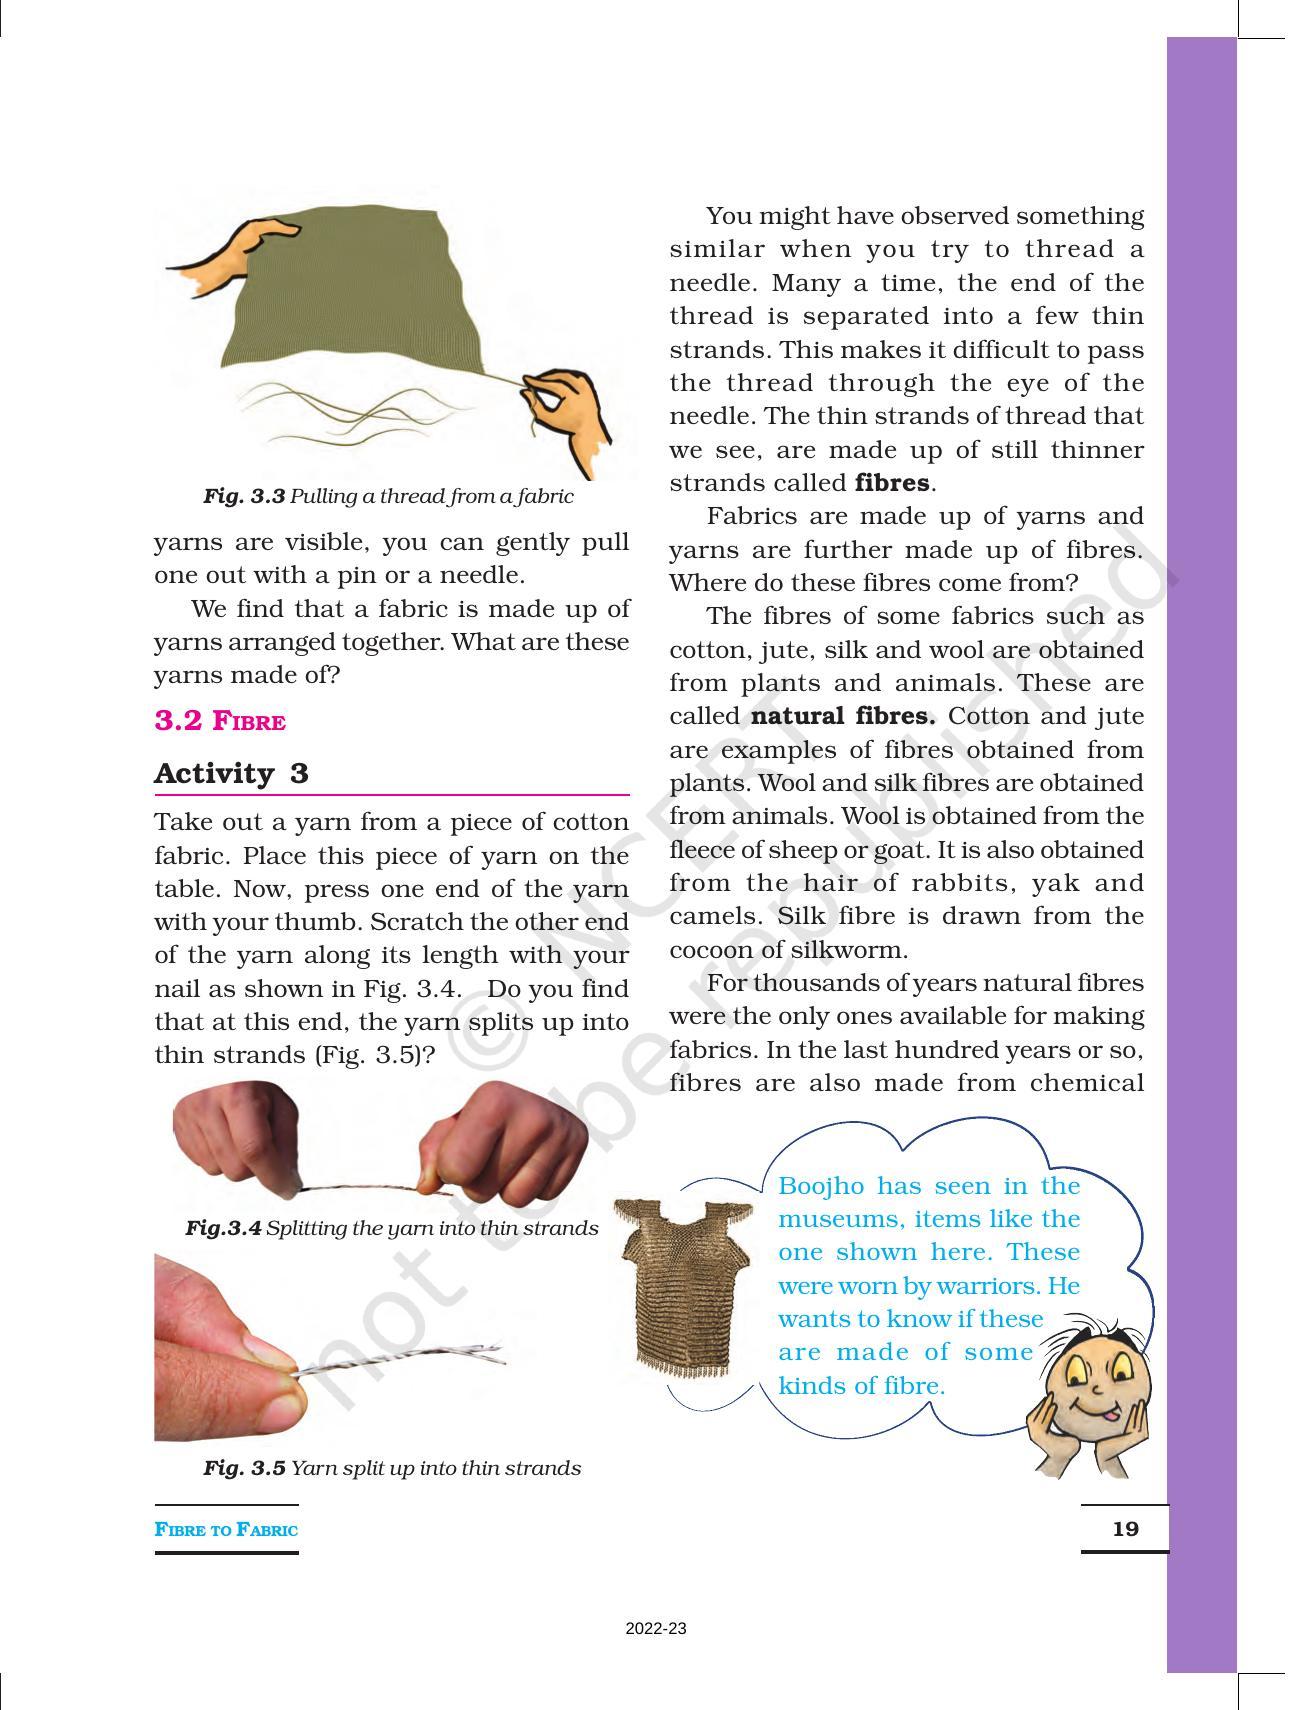 NCERT Book for Class 6 Science: Chapter 3-Fibre to Fabric - Page 2